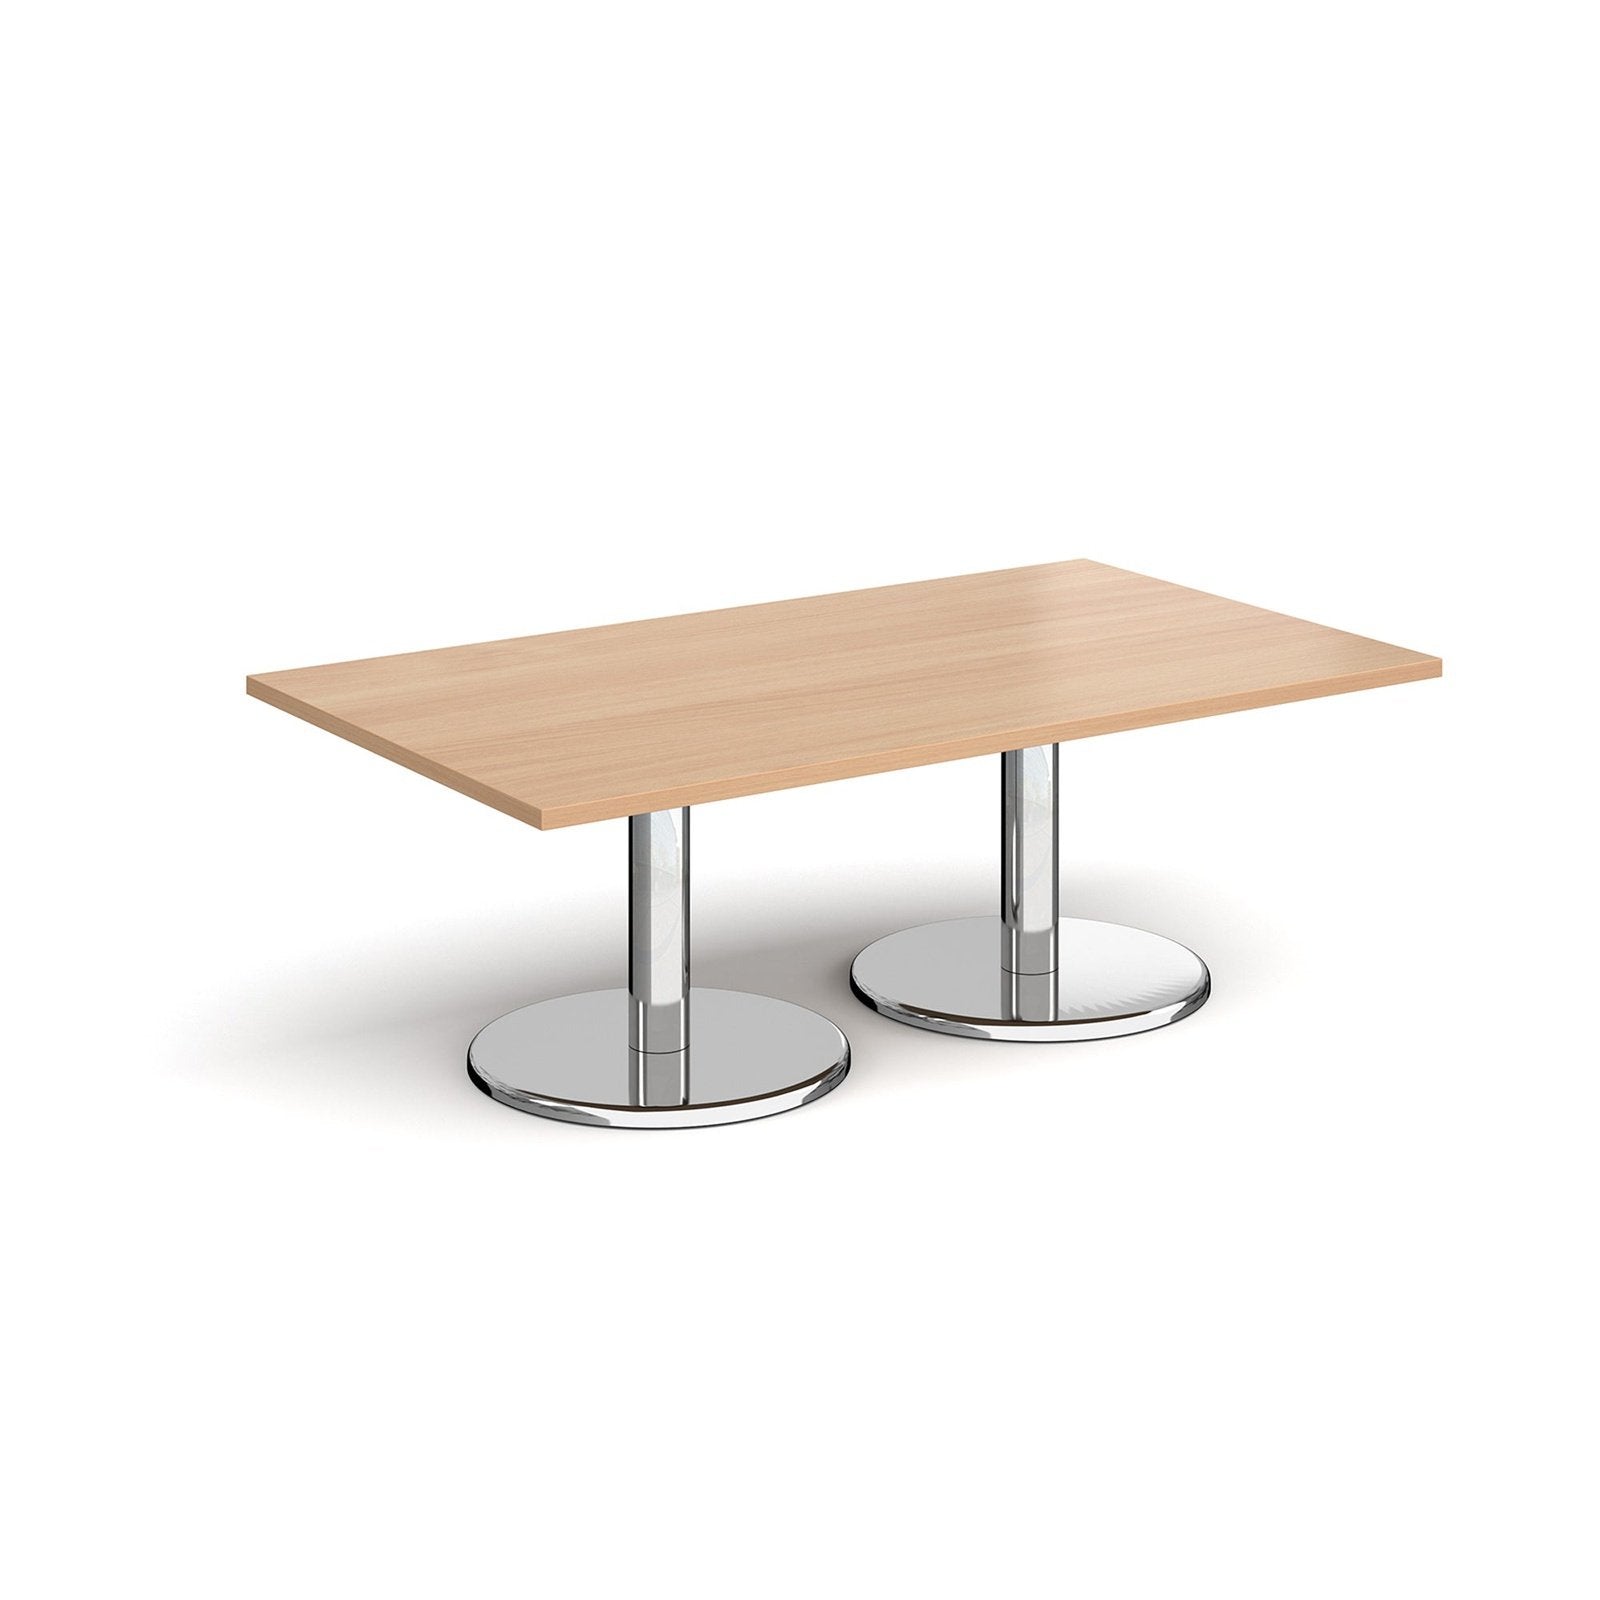 Pisa rectangular coffee table with round chrome bases - Office Products Online